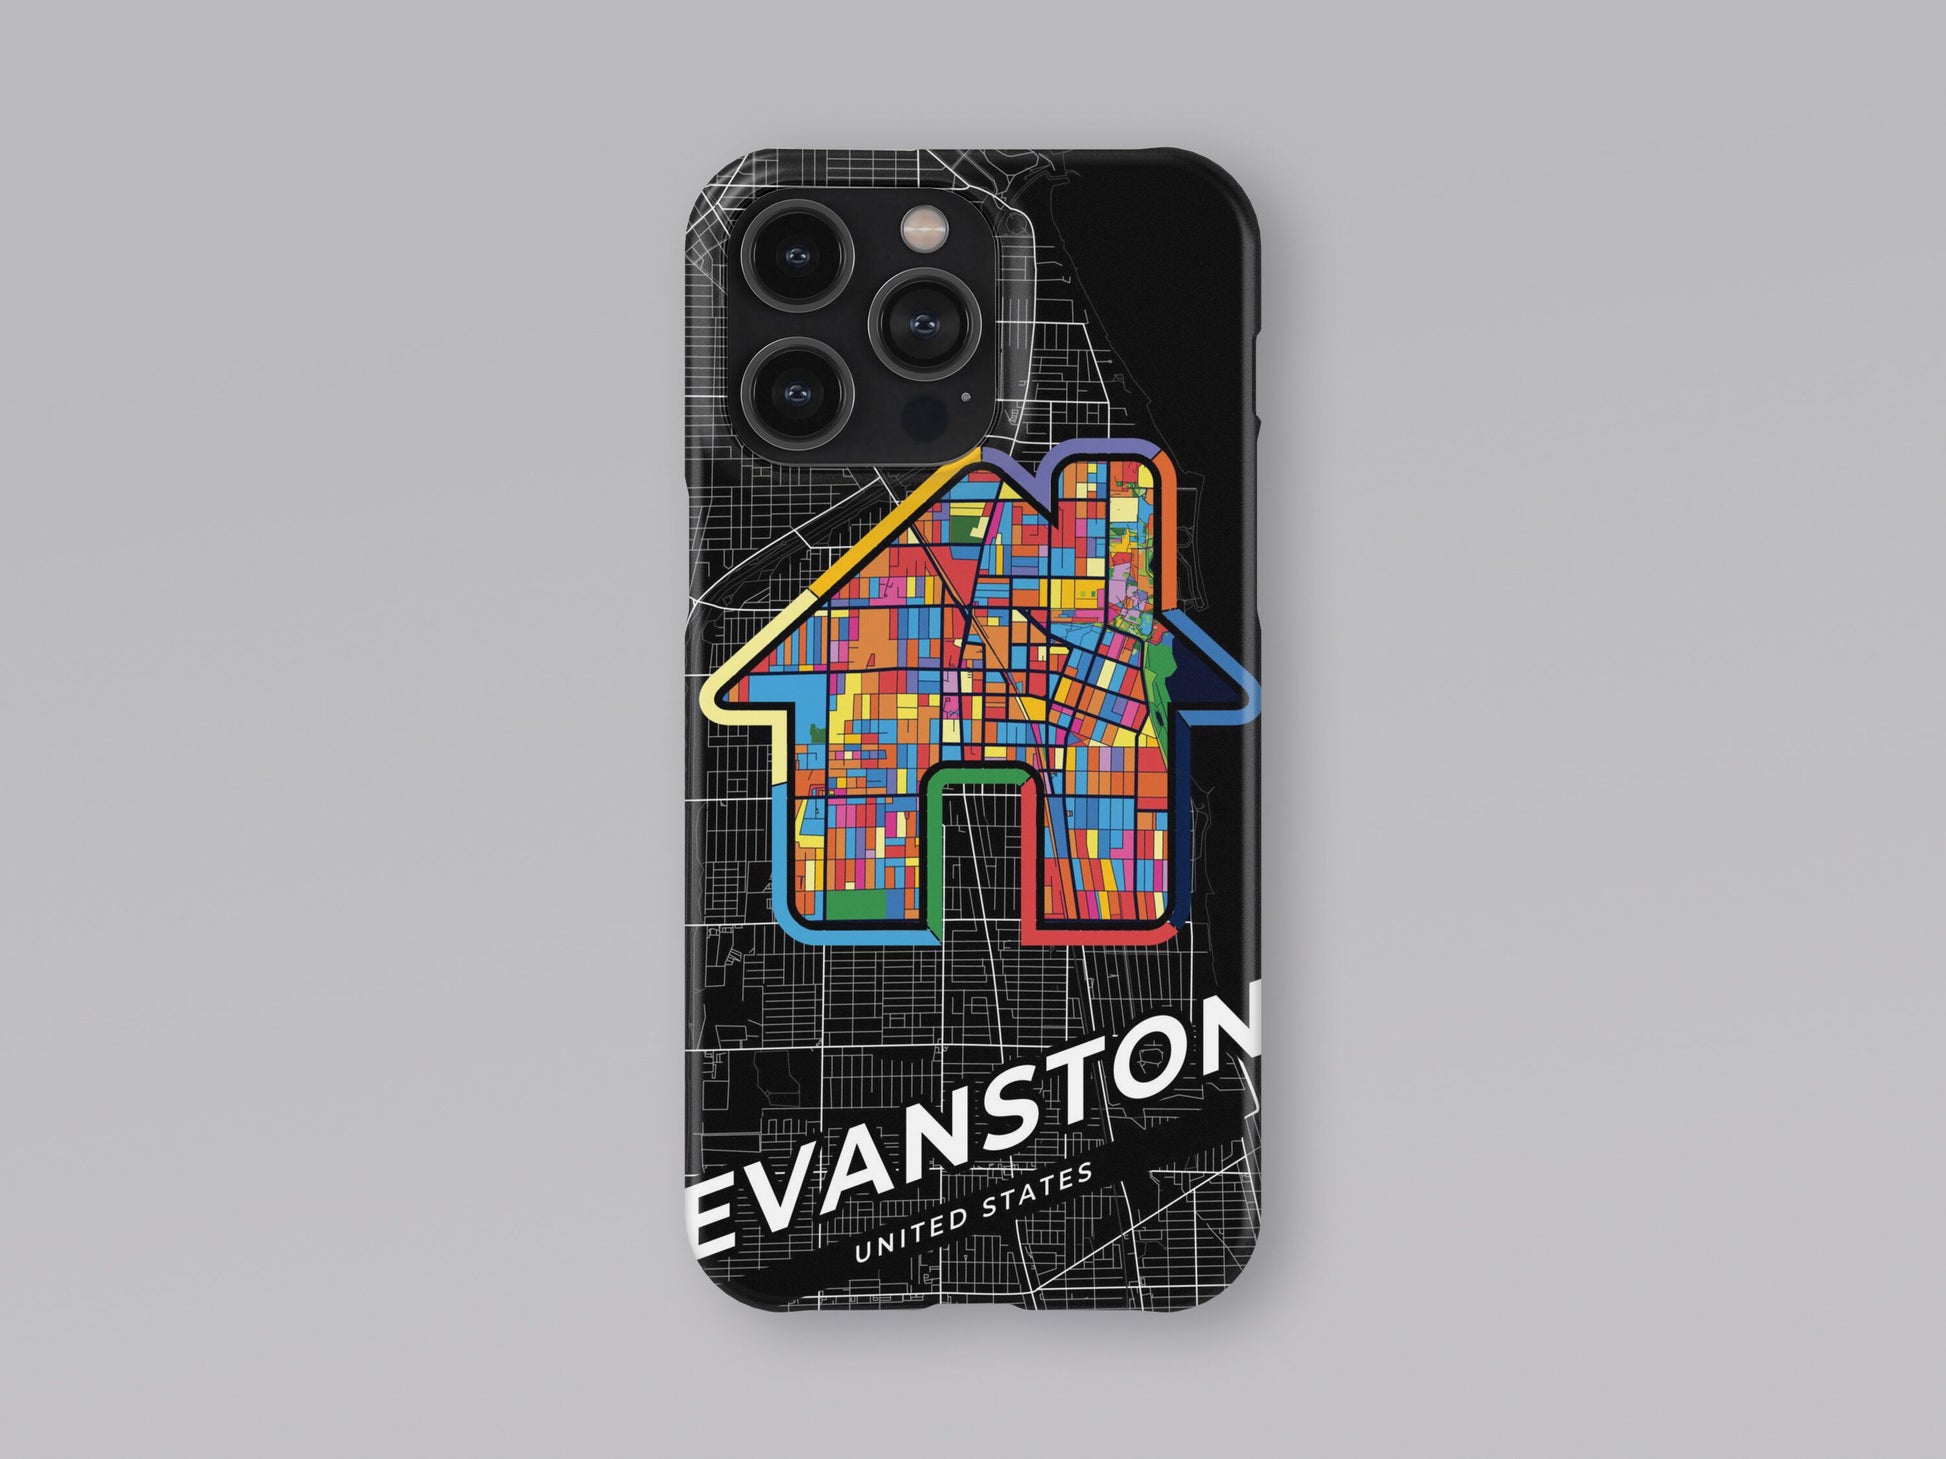 Evanston Illinois slim phone case with colorful icon. Birthday, wedding or housewarming gift. Couple match cases. 3